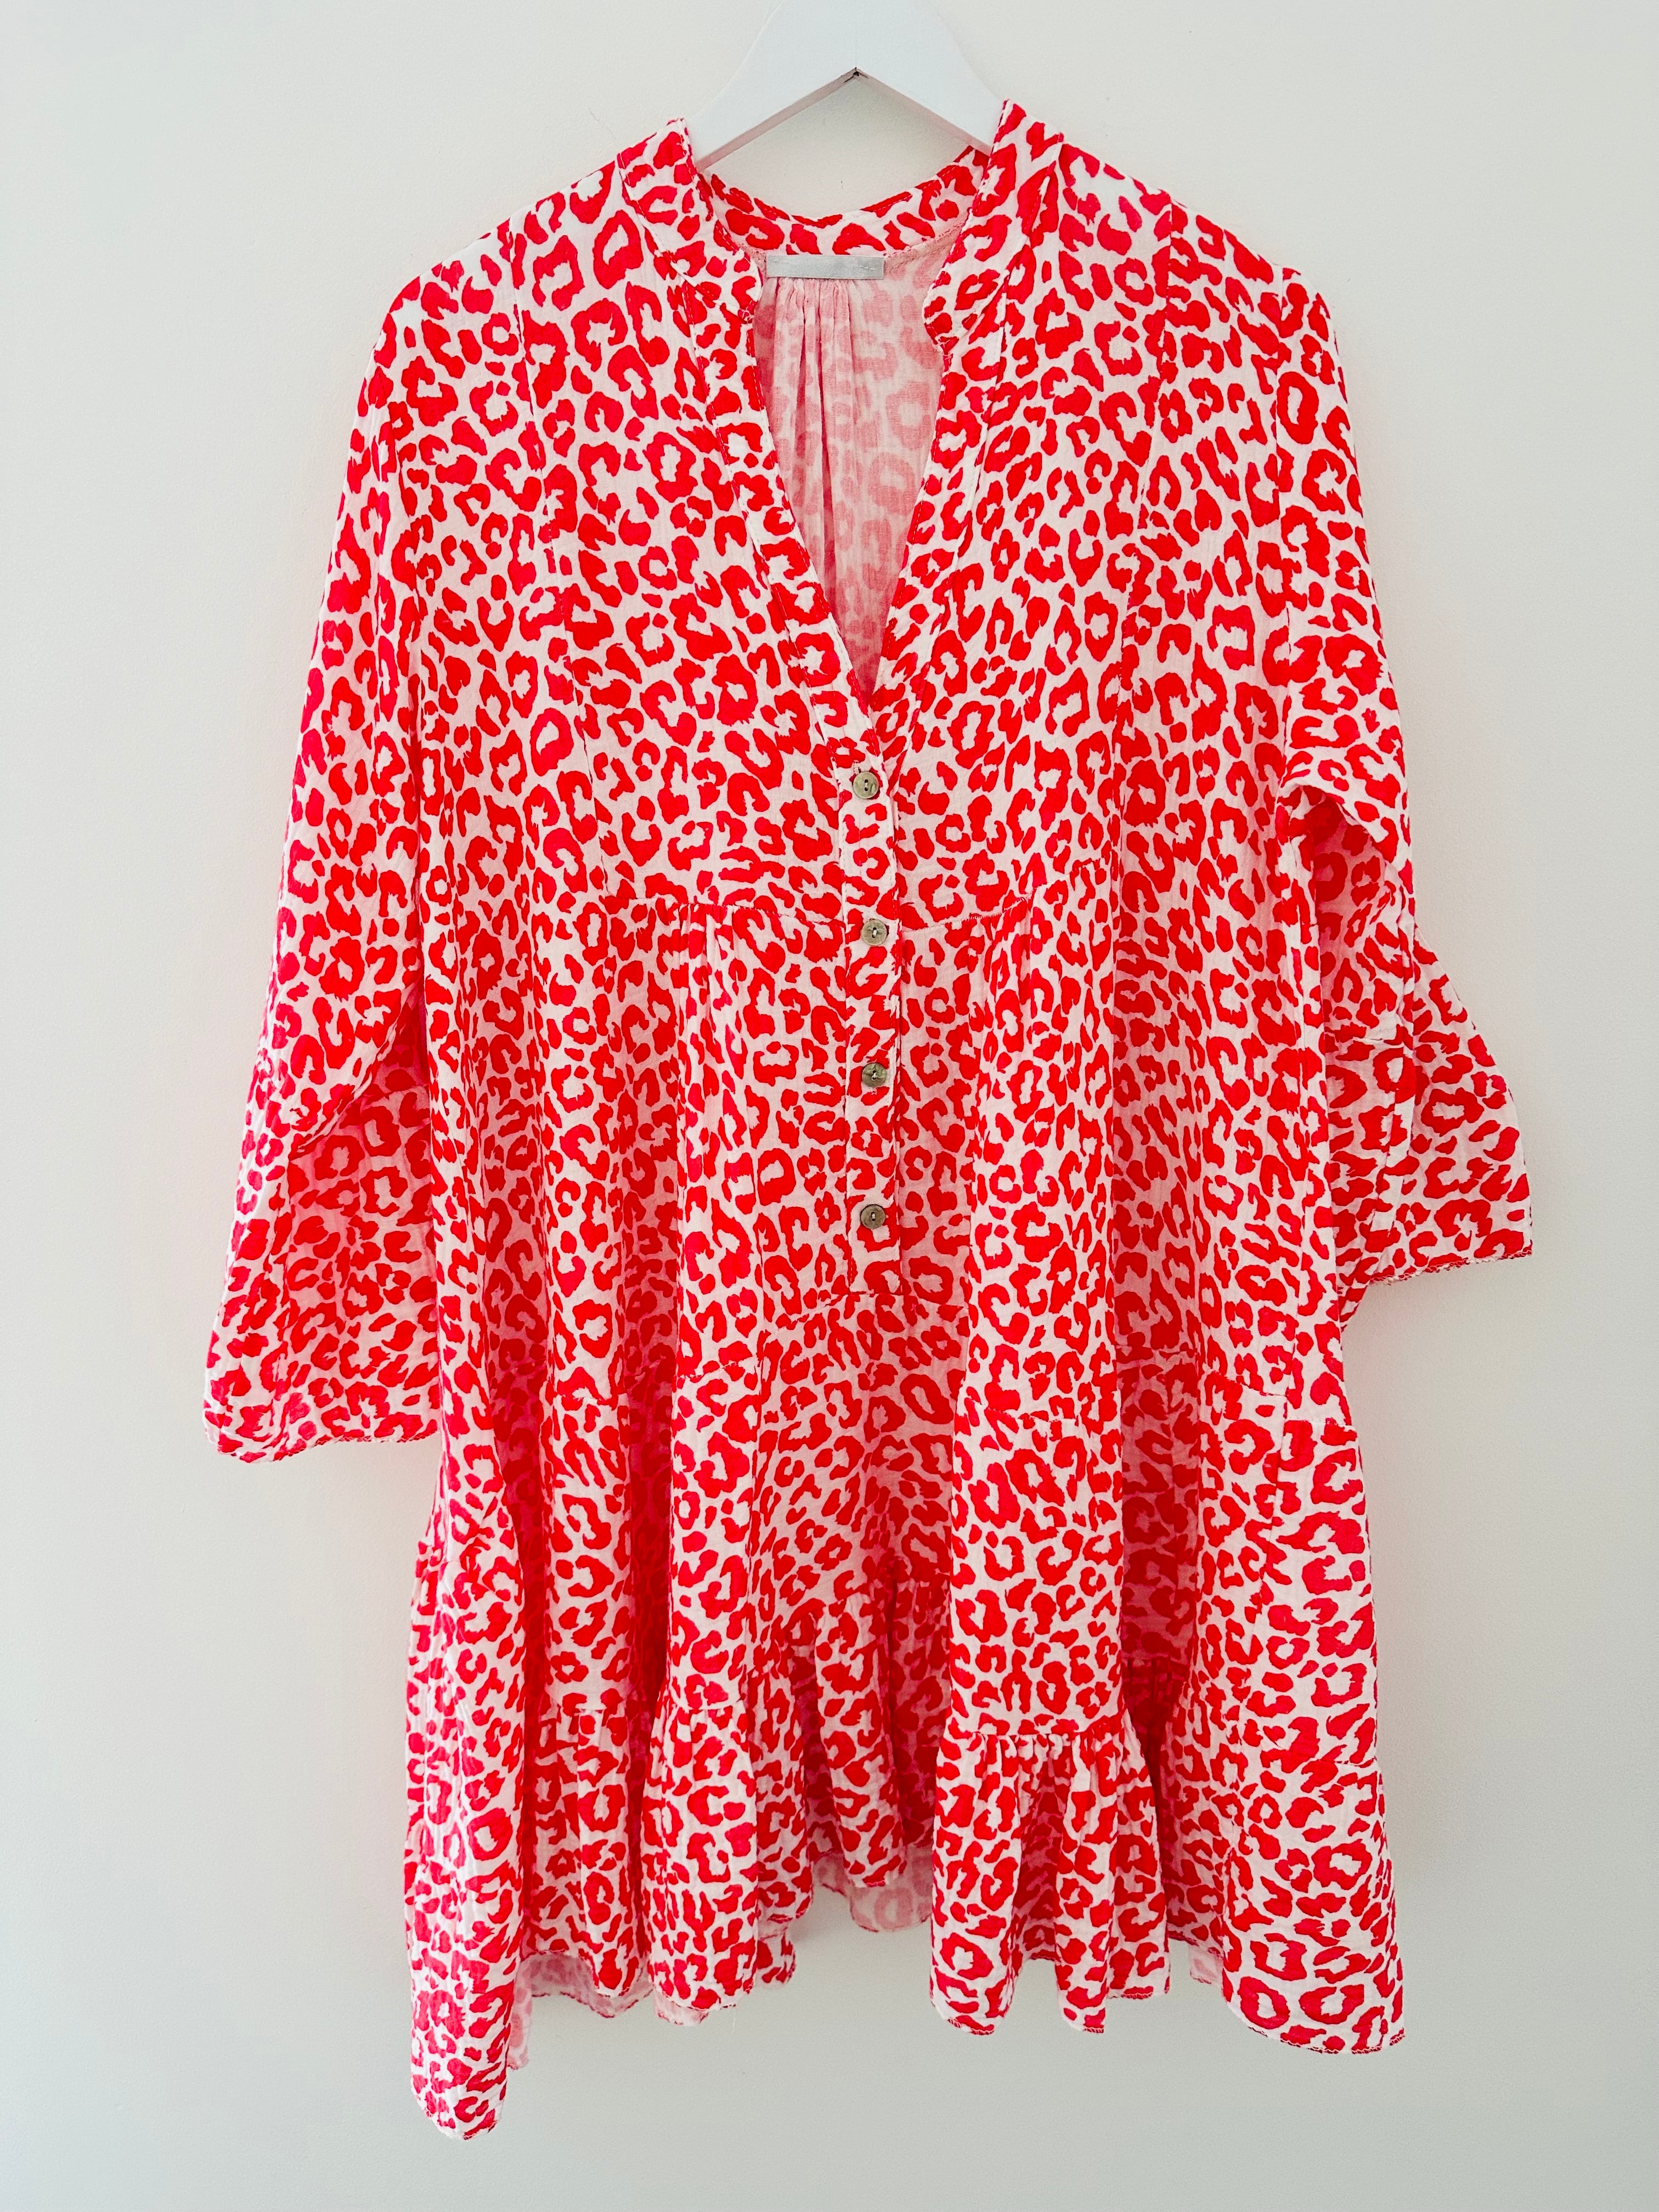 Cheesecloth Print Dress in Bright Red & White